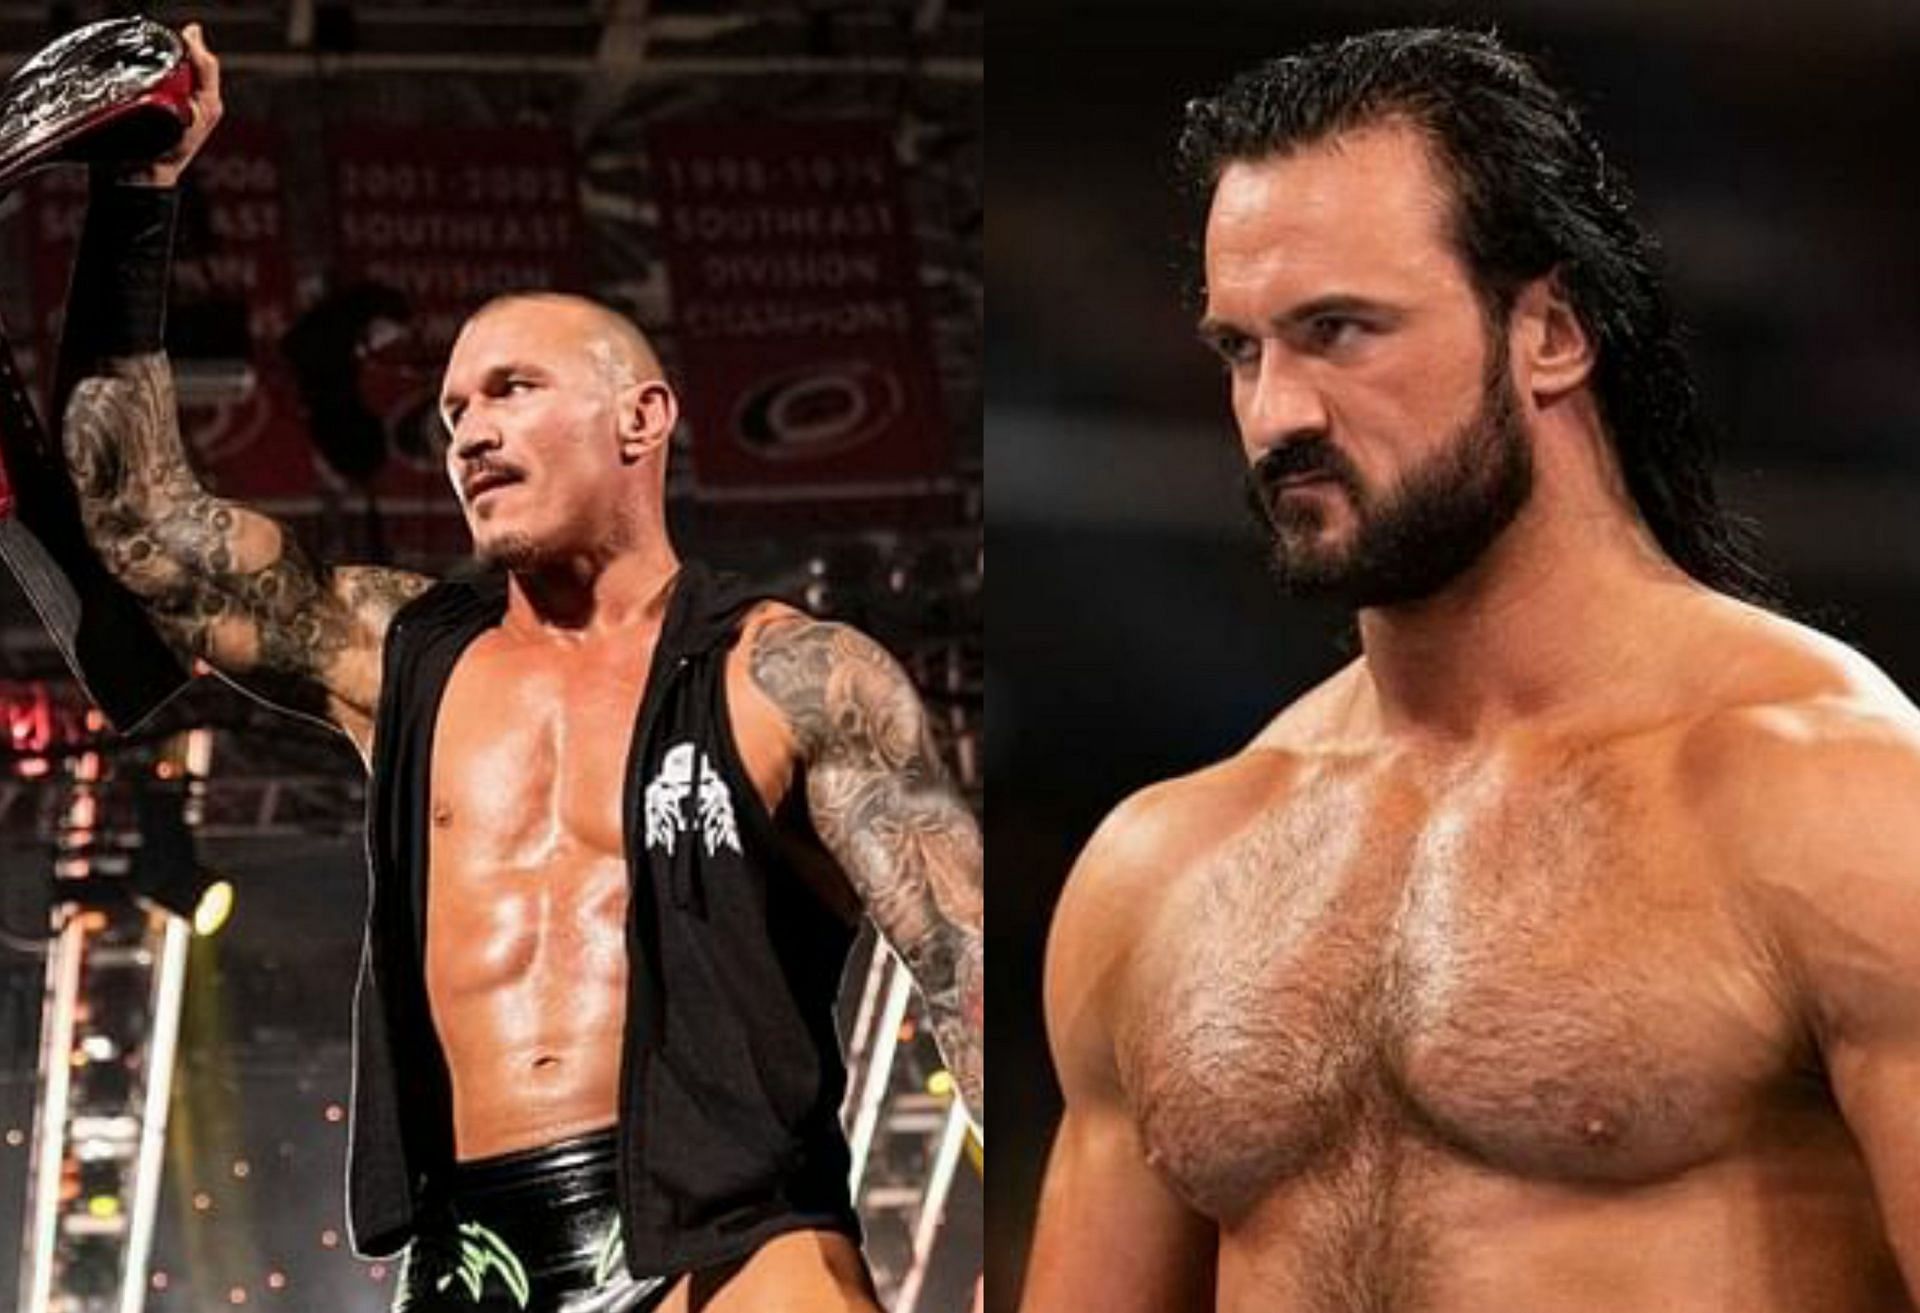 Randy Orton and Drew McIntyre buried the hatchet last night on SmackDown.